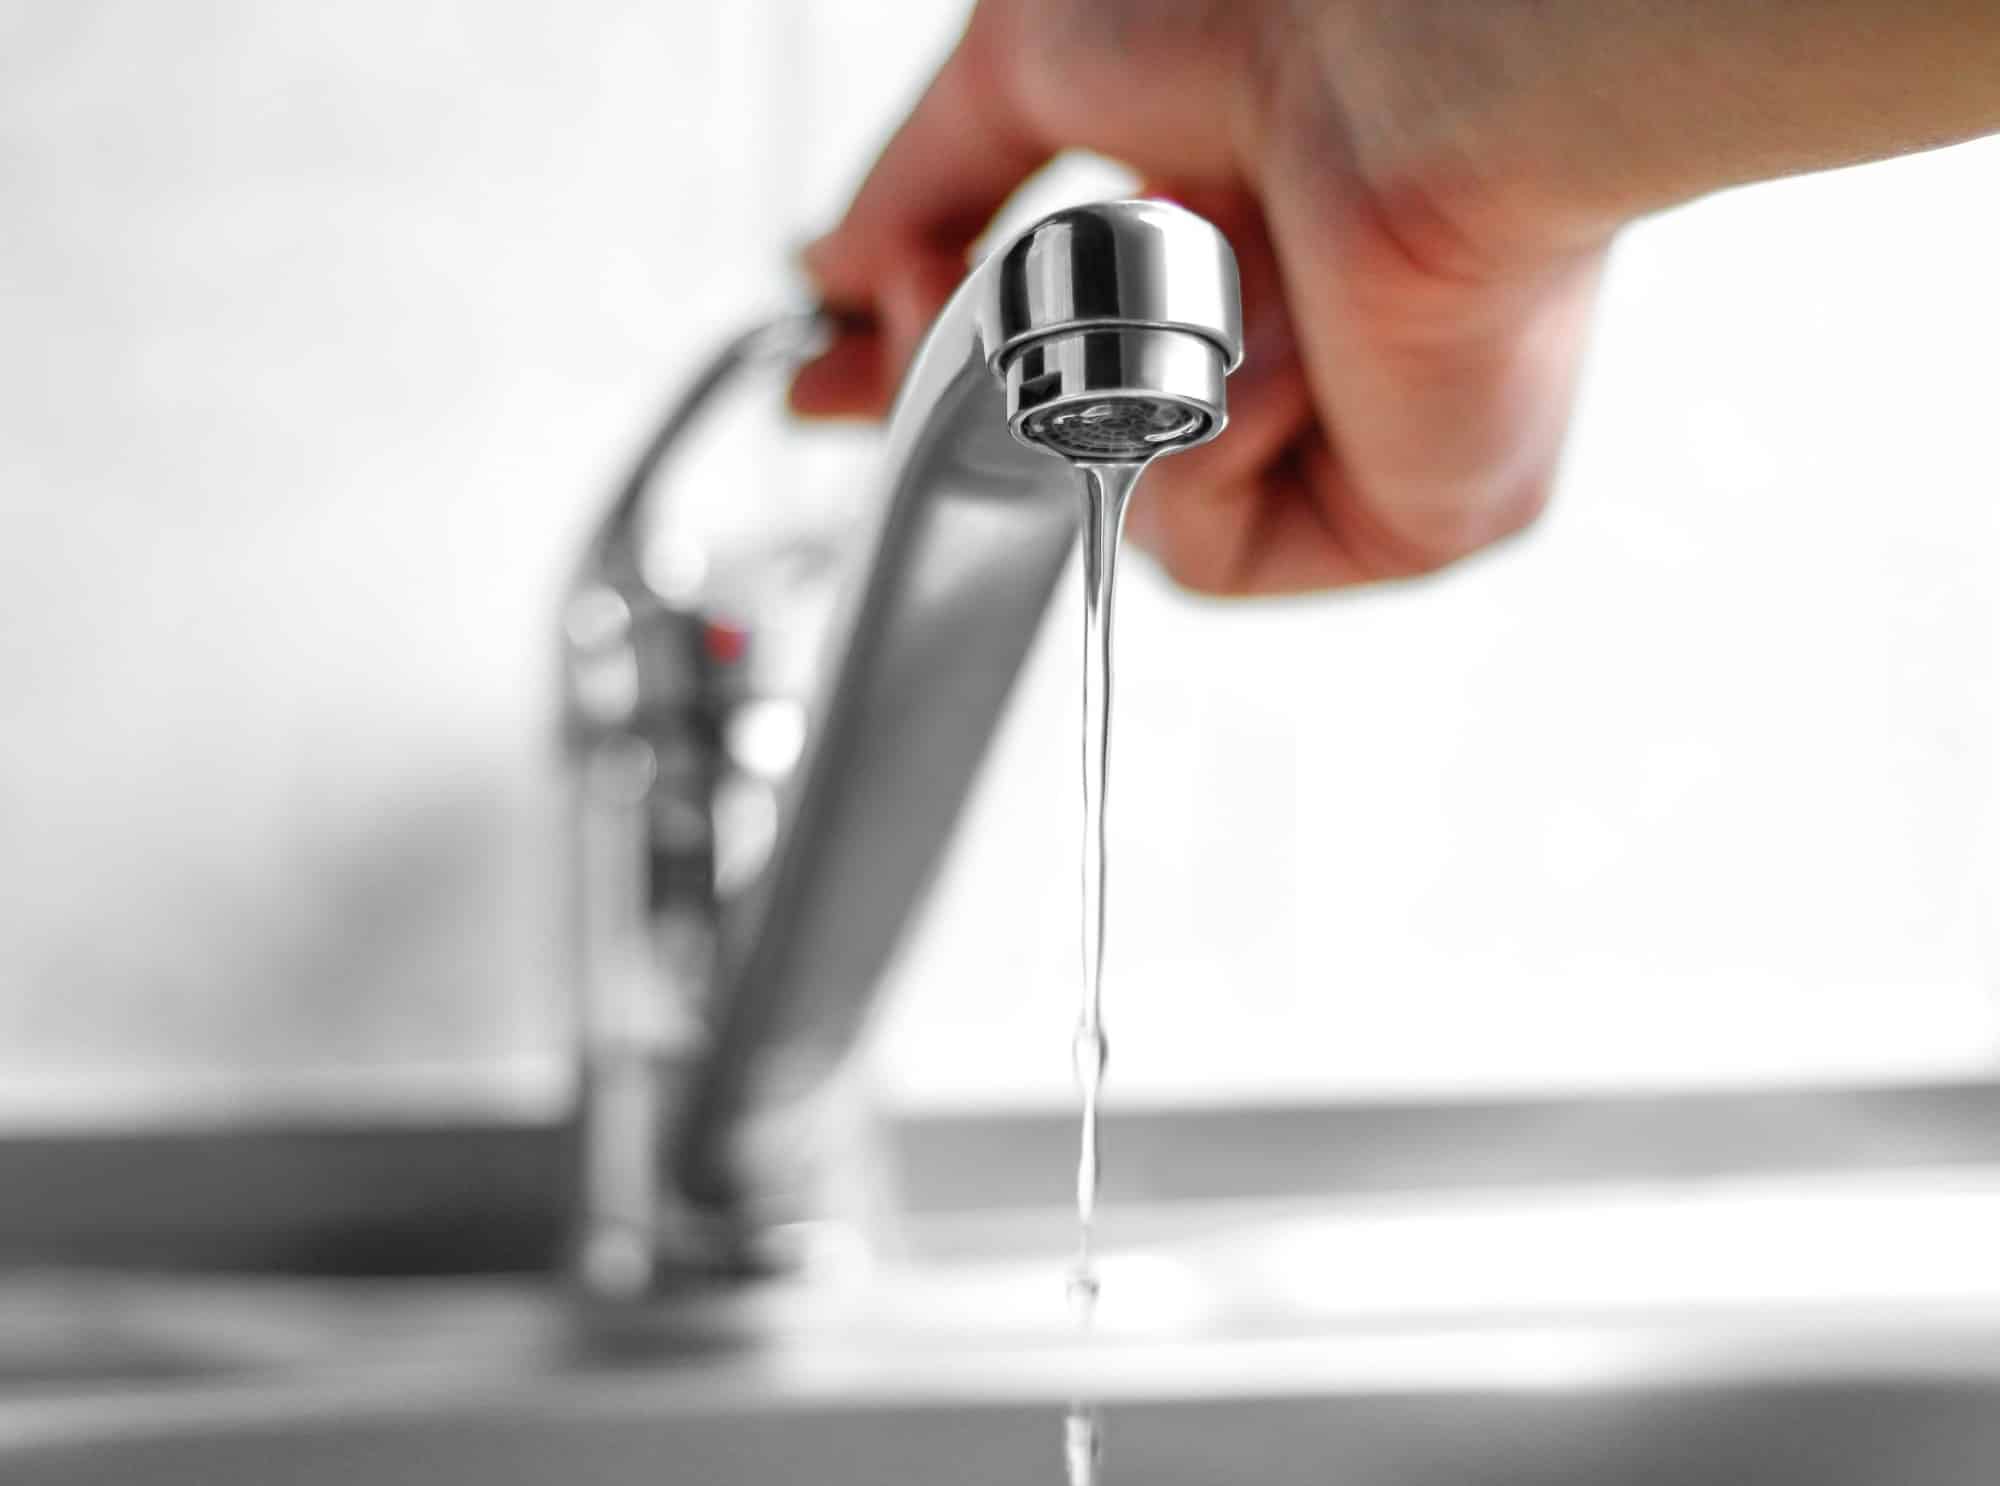 Common Plumbing Problems: How to Fix a Leaky Faucet